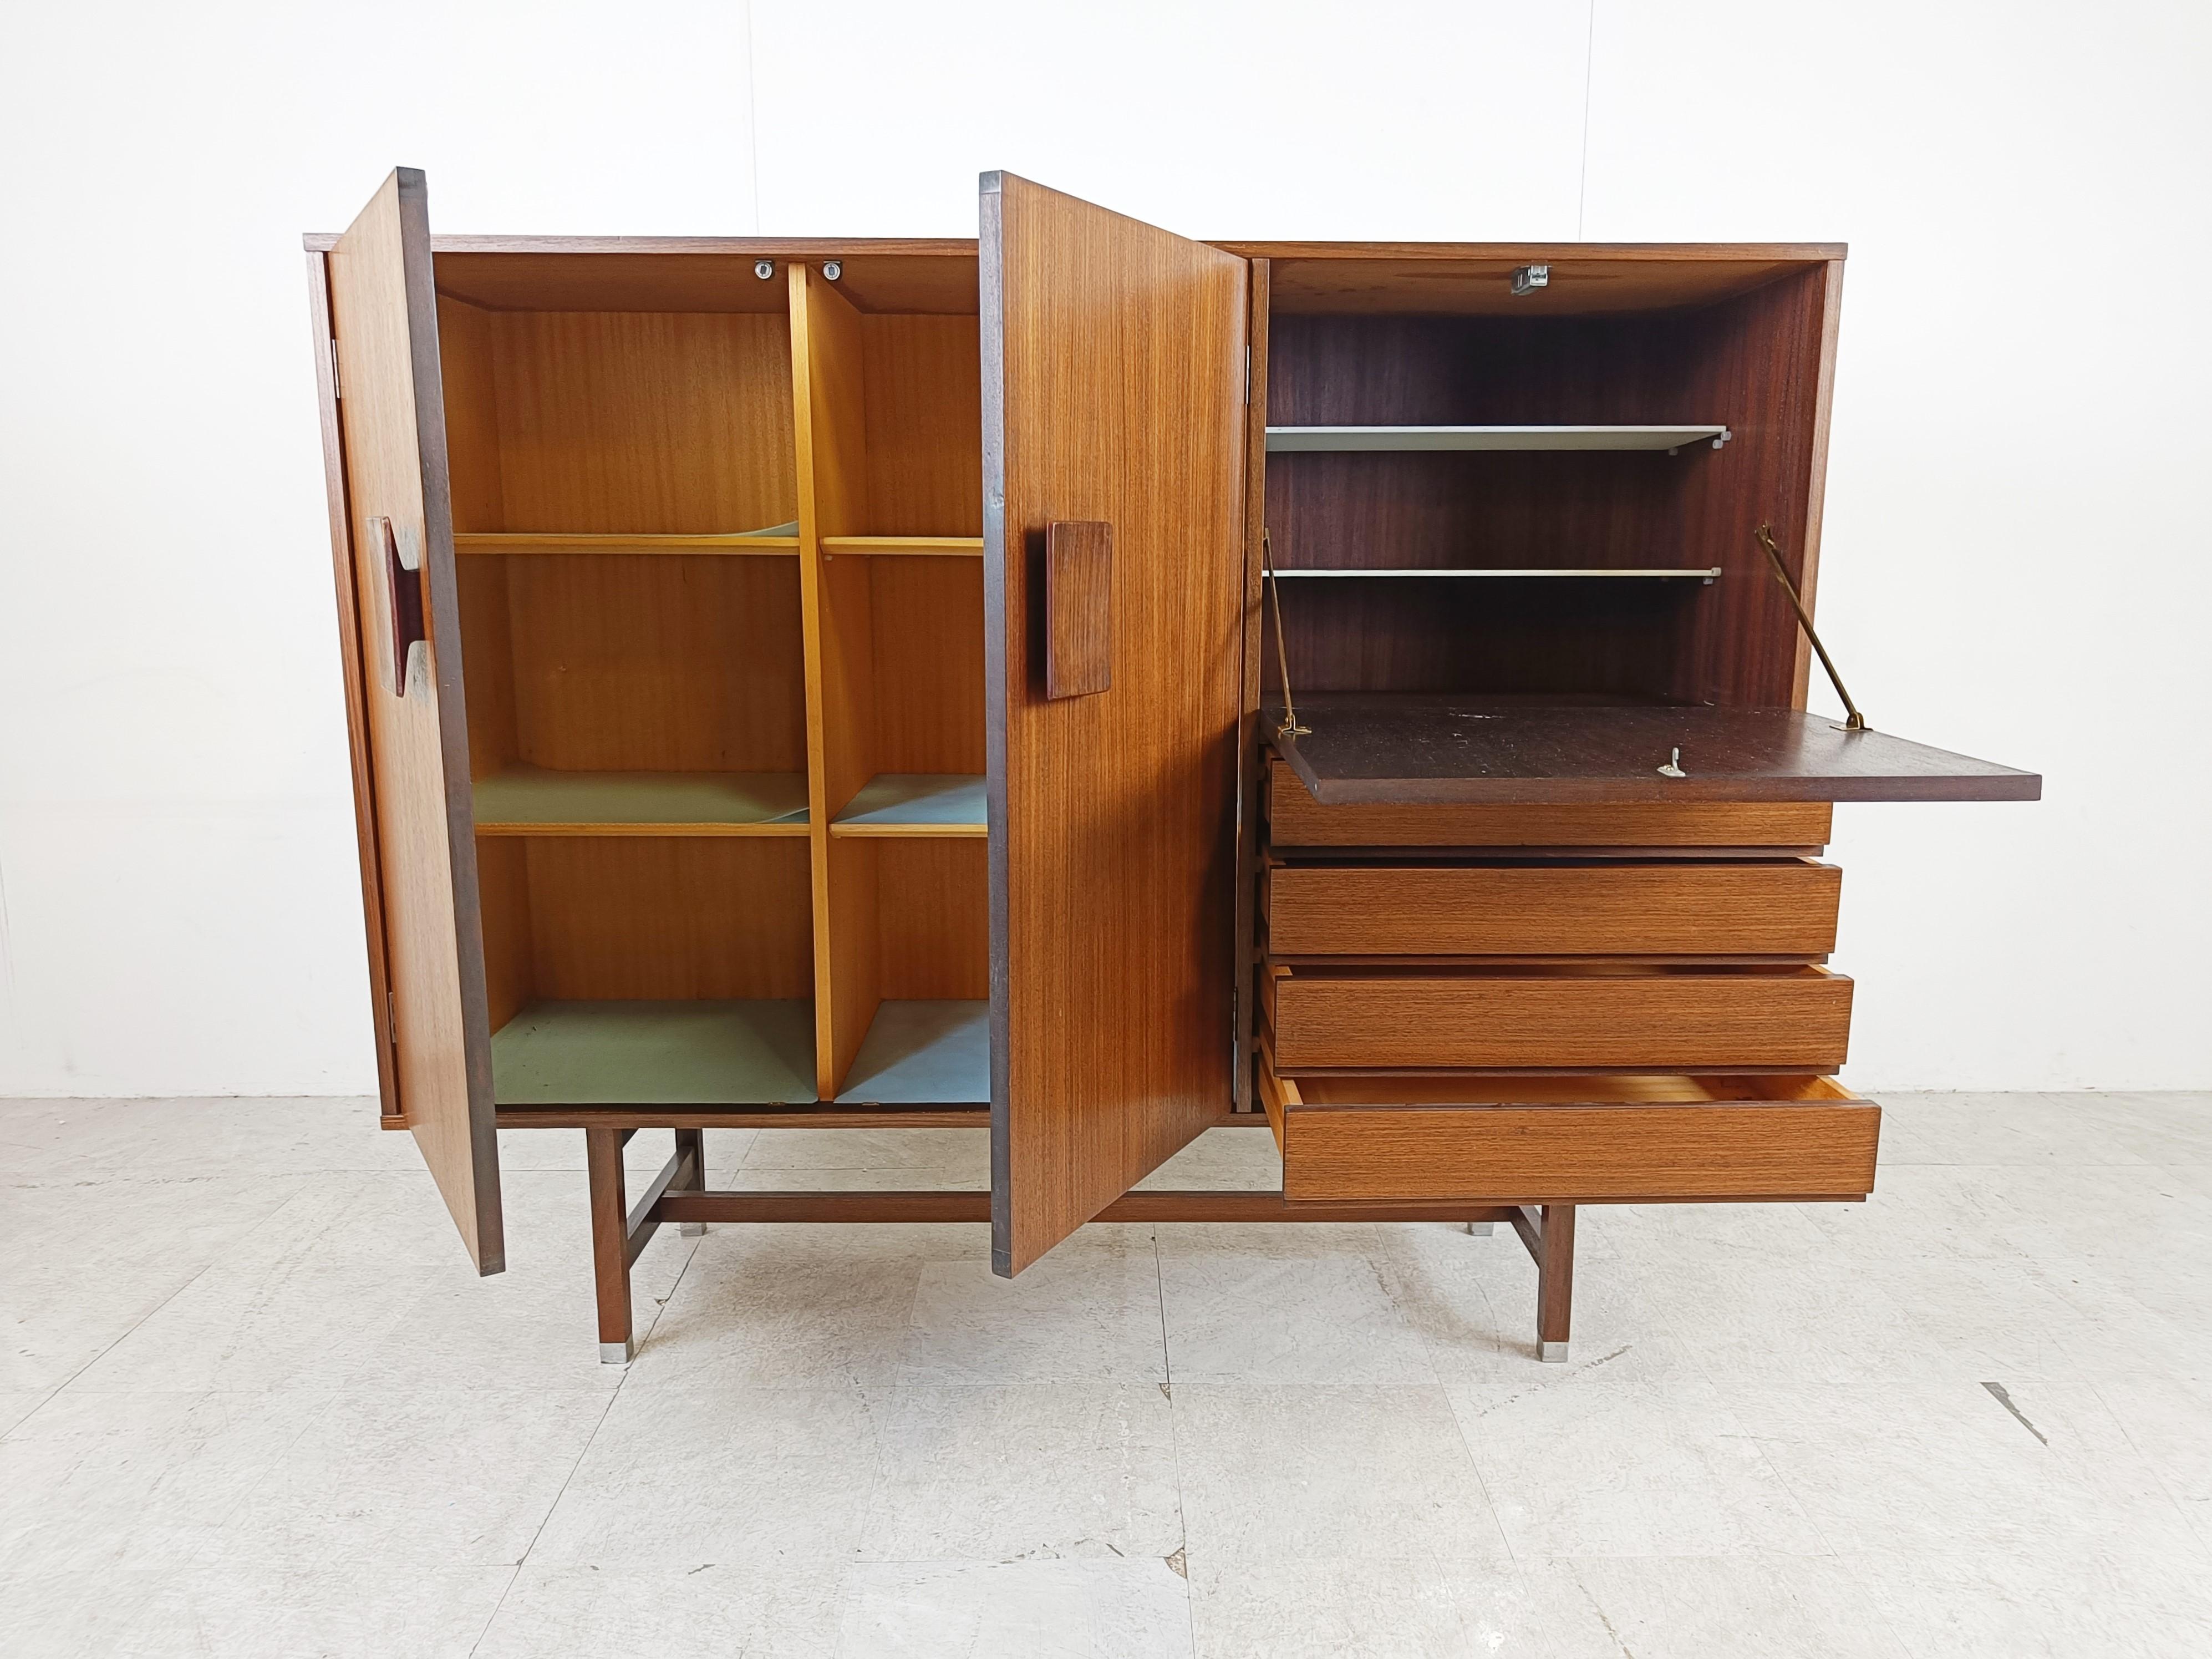 Scandinavian design rosewood bar cabinet by Inger Klingenberg for Fristho.

Simple yet elegant design.

The cabinet consists of two door, 4 drawers and a fold down door with white glass shelves.

1960s - Denmark

good overall condition apart from